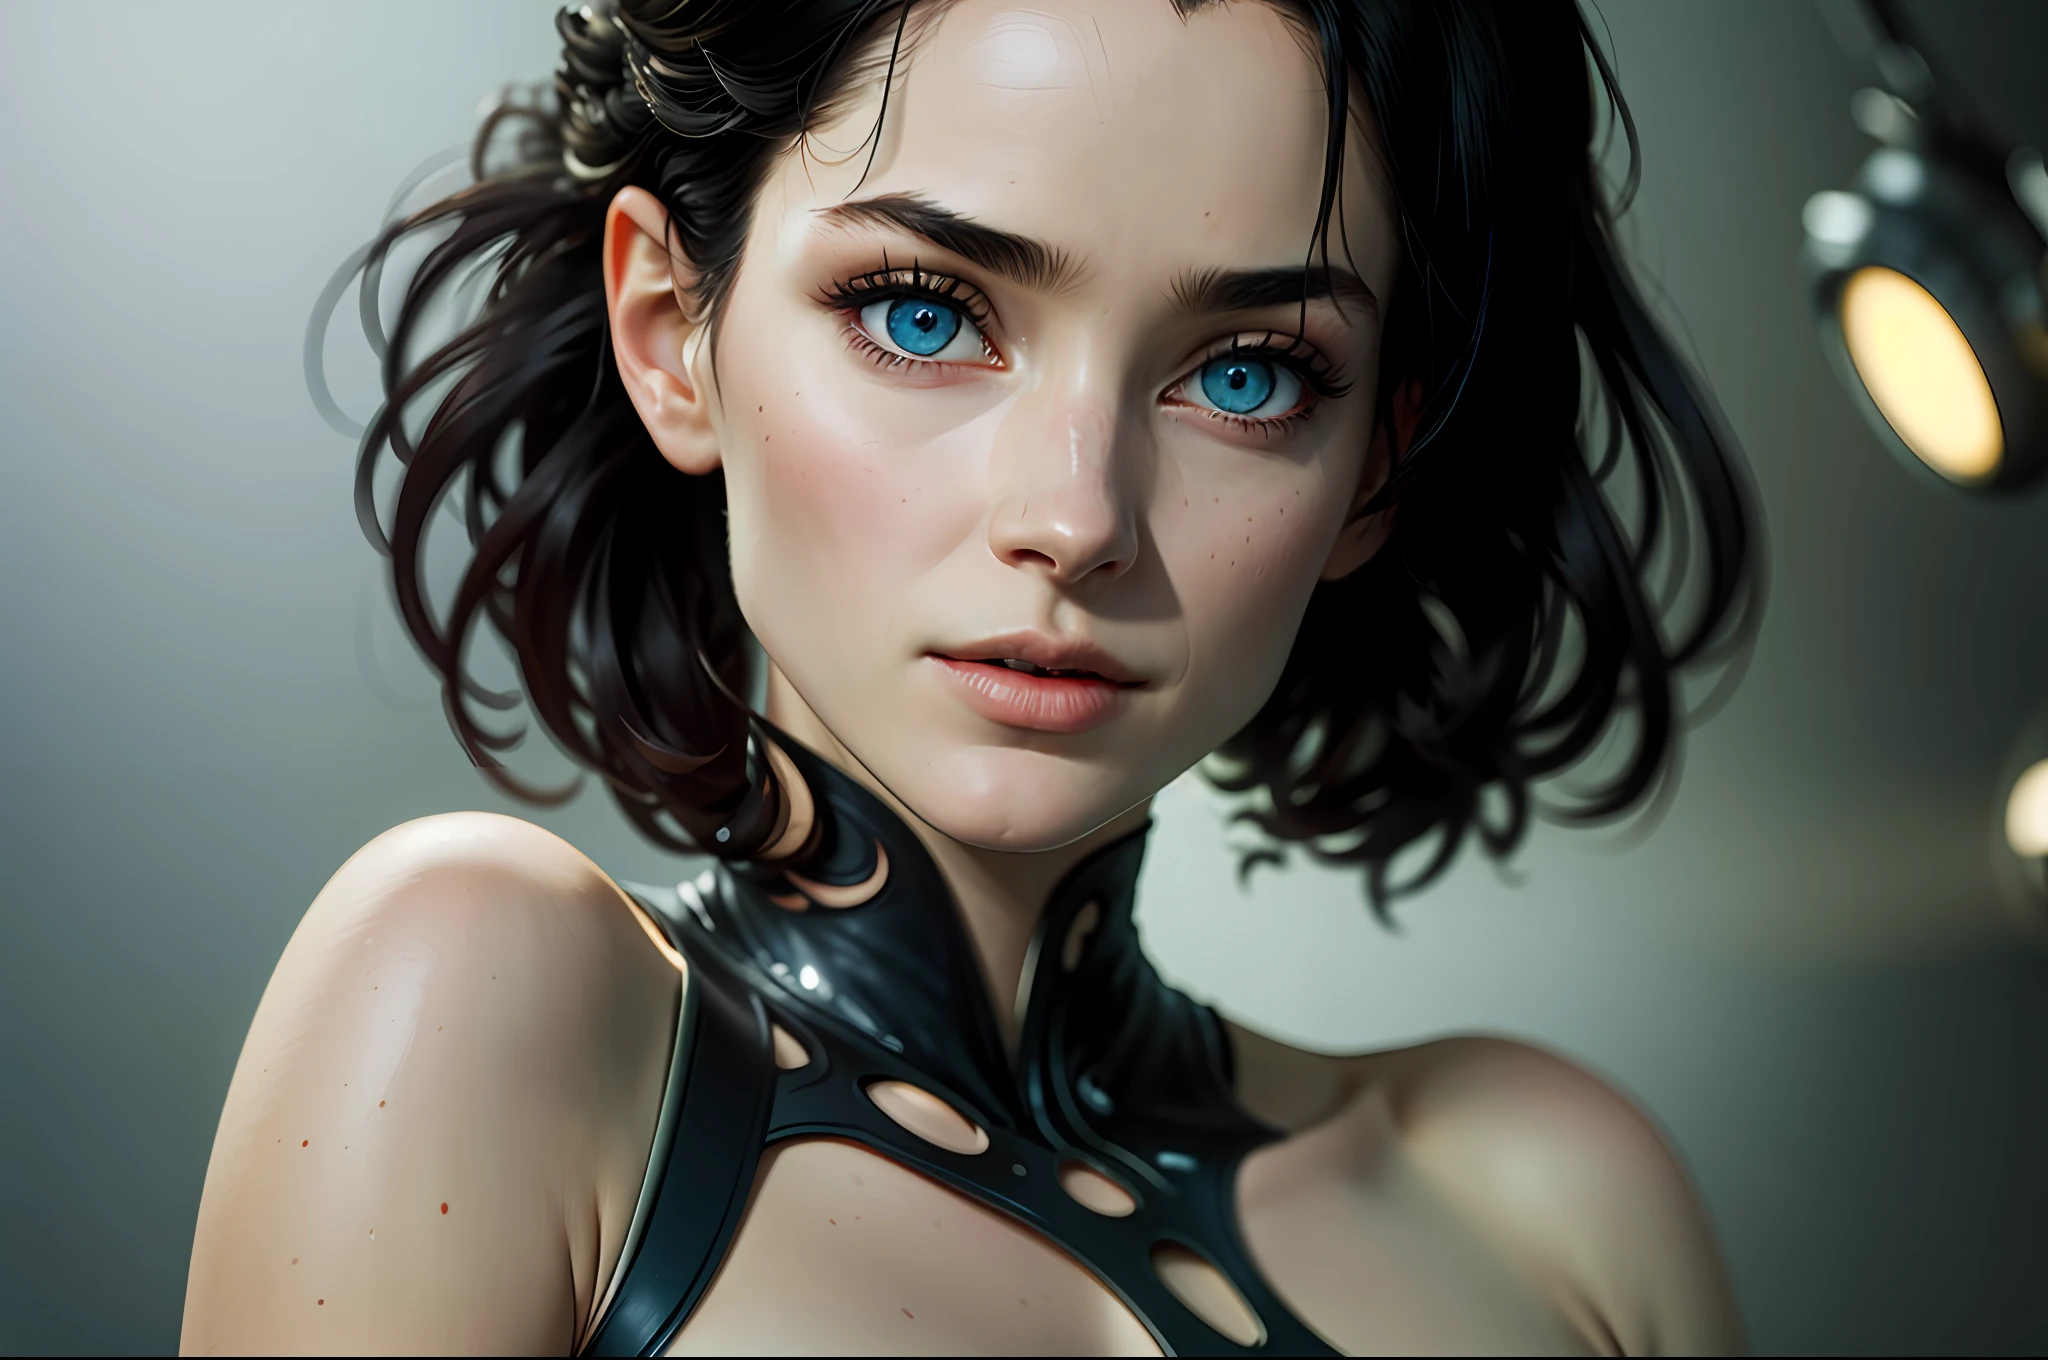 A breathtaking masterpiece that brings photorealism to life with exceptional attention to detail. The scene portrays a young girl reminiscent of The Matrix, with lustrous black hair cascading around her shoulders. Her intense blue eyes lock with the viewer's gaze, captivating them with their depth and mystery. The lighting is expertly crafted, illuminating her features with a soft, ethereal glow. She stands alone, exuding an air of quiet confidence. The background is intentionally blurred, emphasizing her presence as the focal point. The composition showcases her parted lips, inviting intrigue and curiosity. The image is rendered with utmost realism, with short hair and subtle details, while retaining the beauty of film grain for a touch of nostalgia. Photography, professional lighting setup with diffused softbox and reflector, capturing the model in exquisite detail and achieving beautiful lighting effects